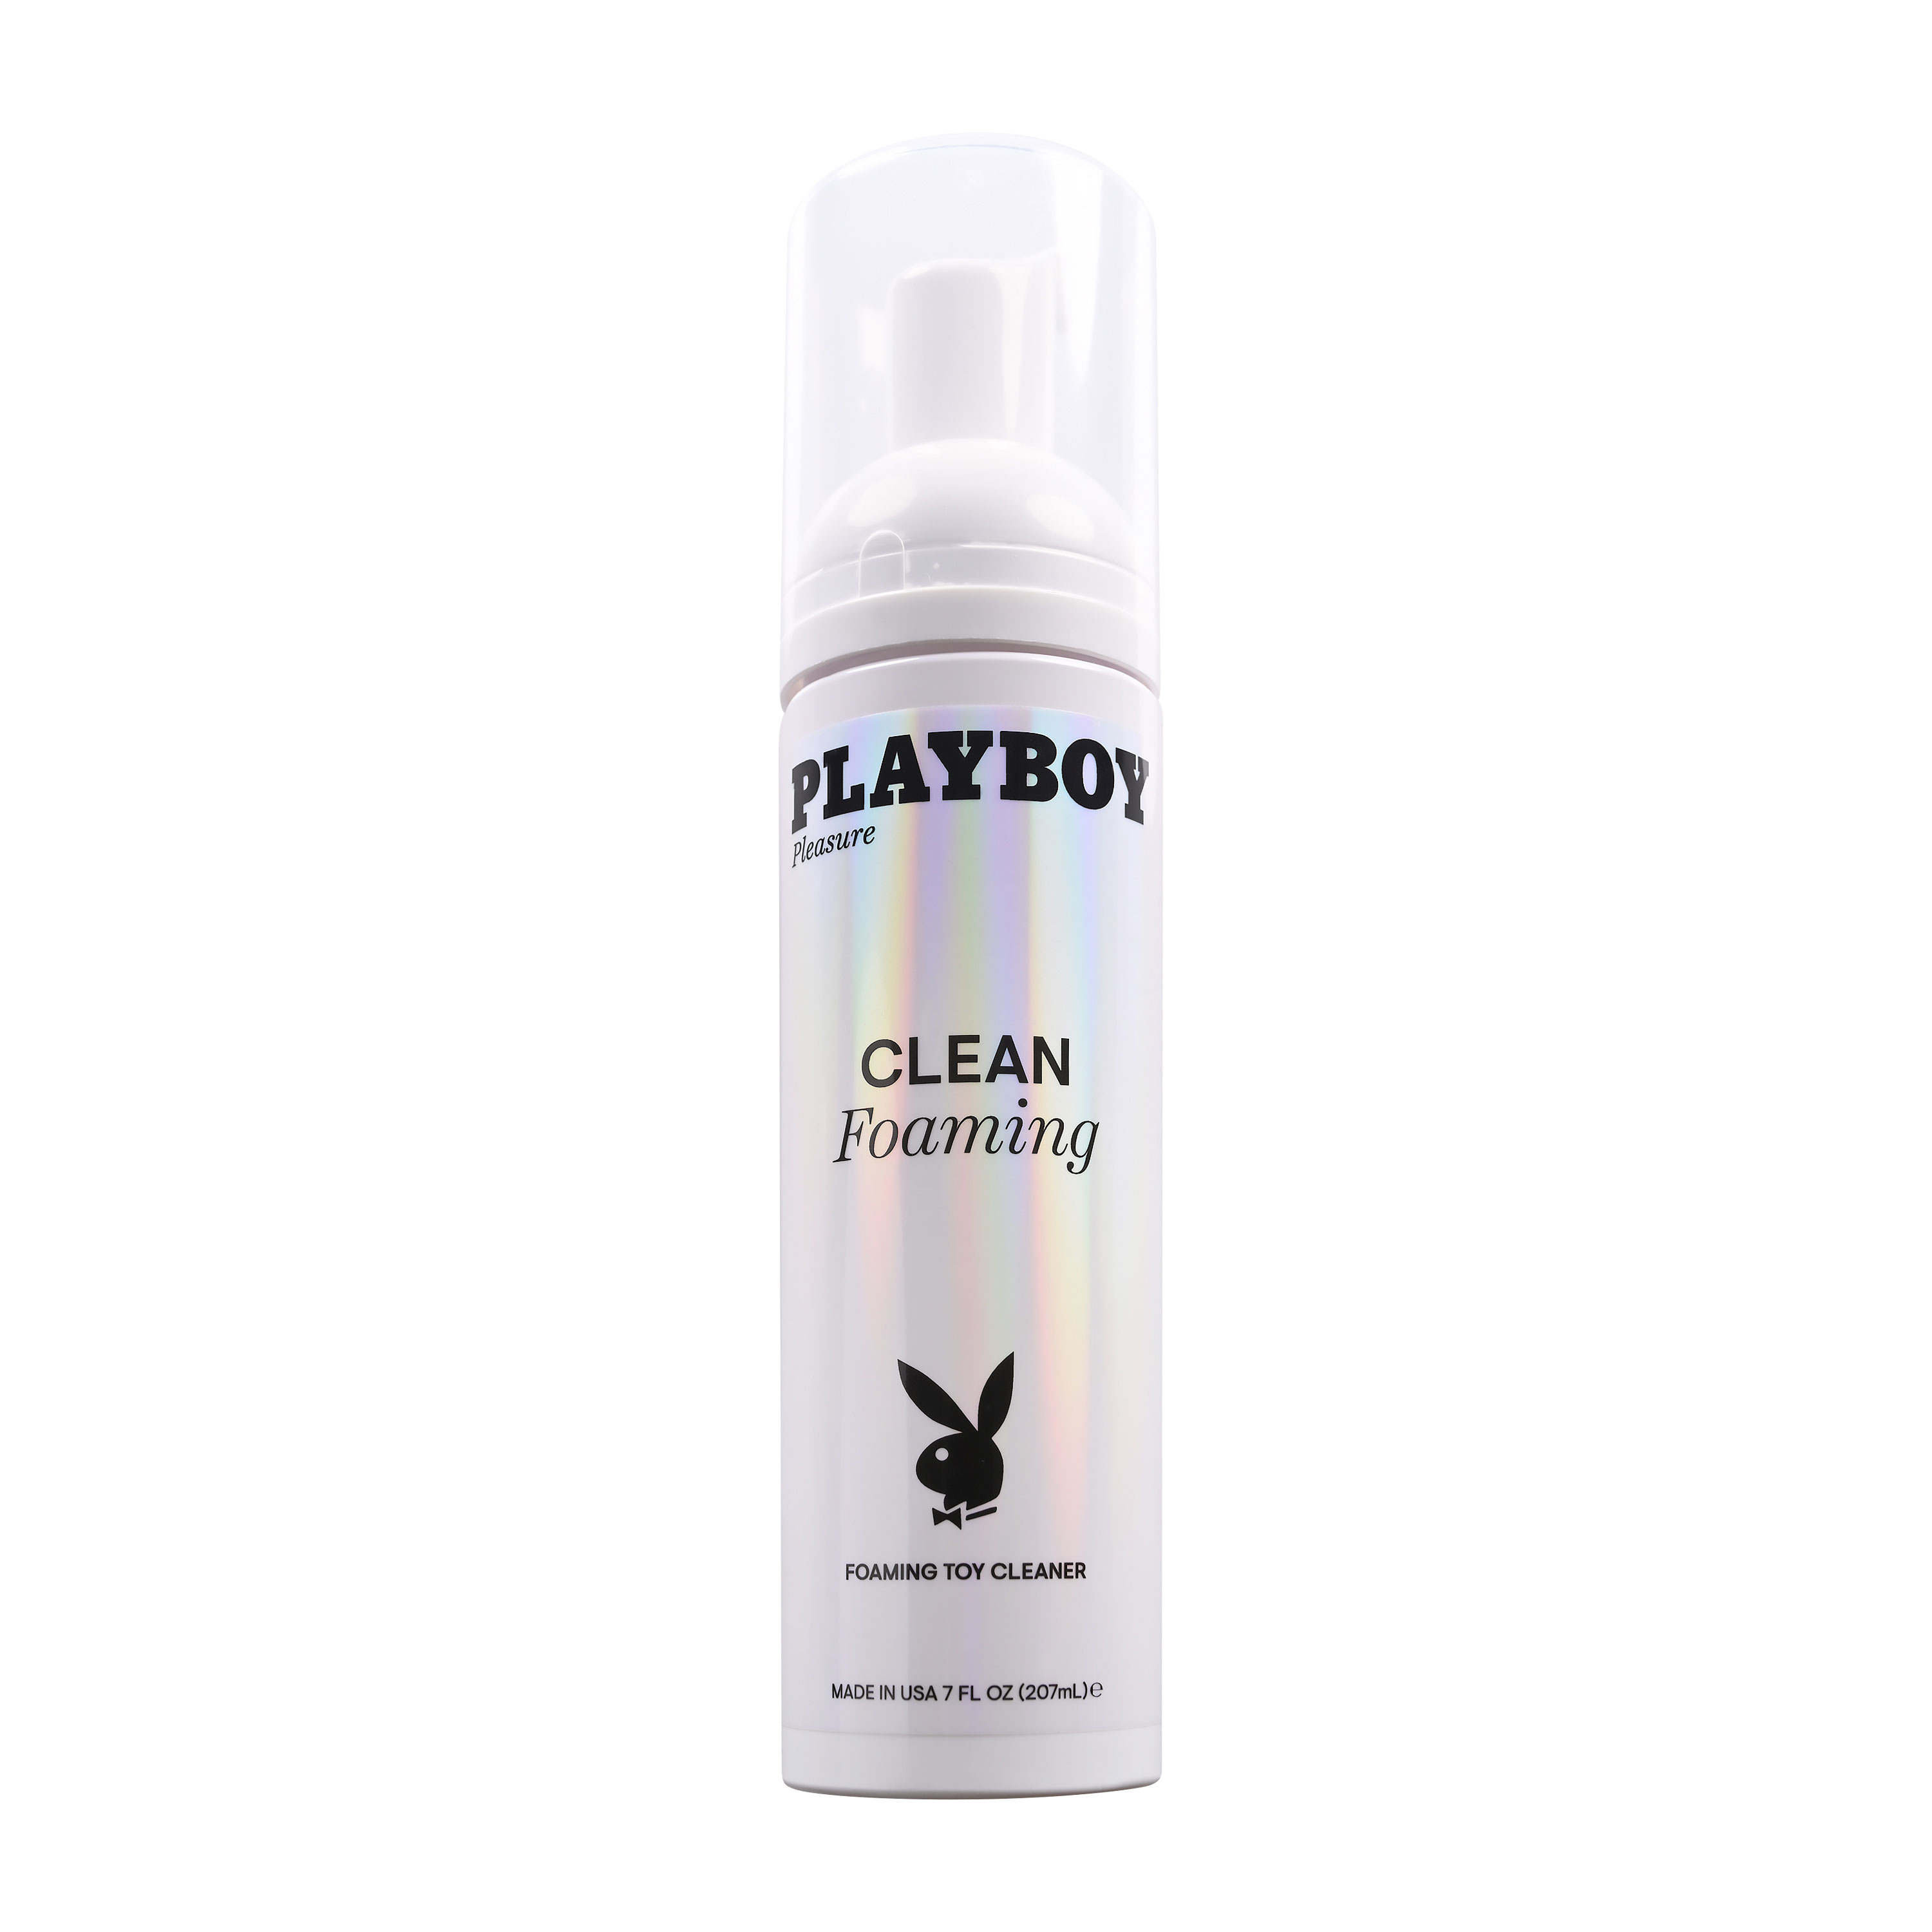 playboy pleasure cleaning foaming  toy cleaner  oz 